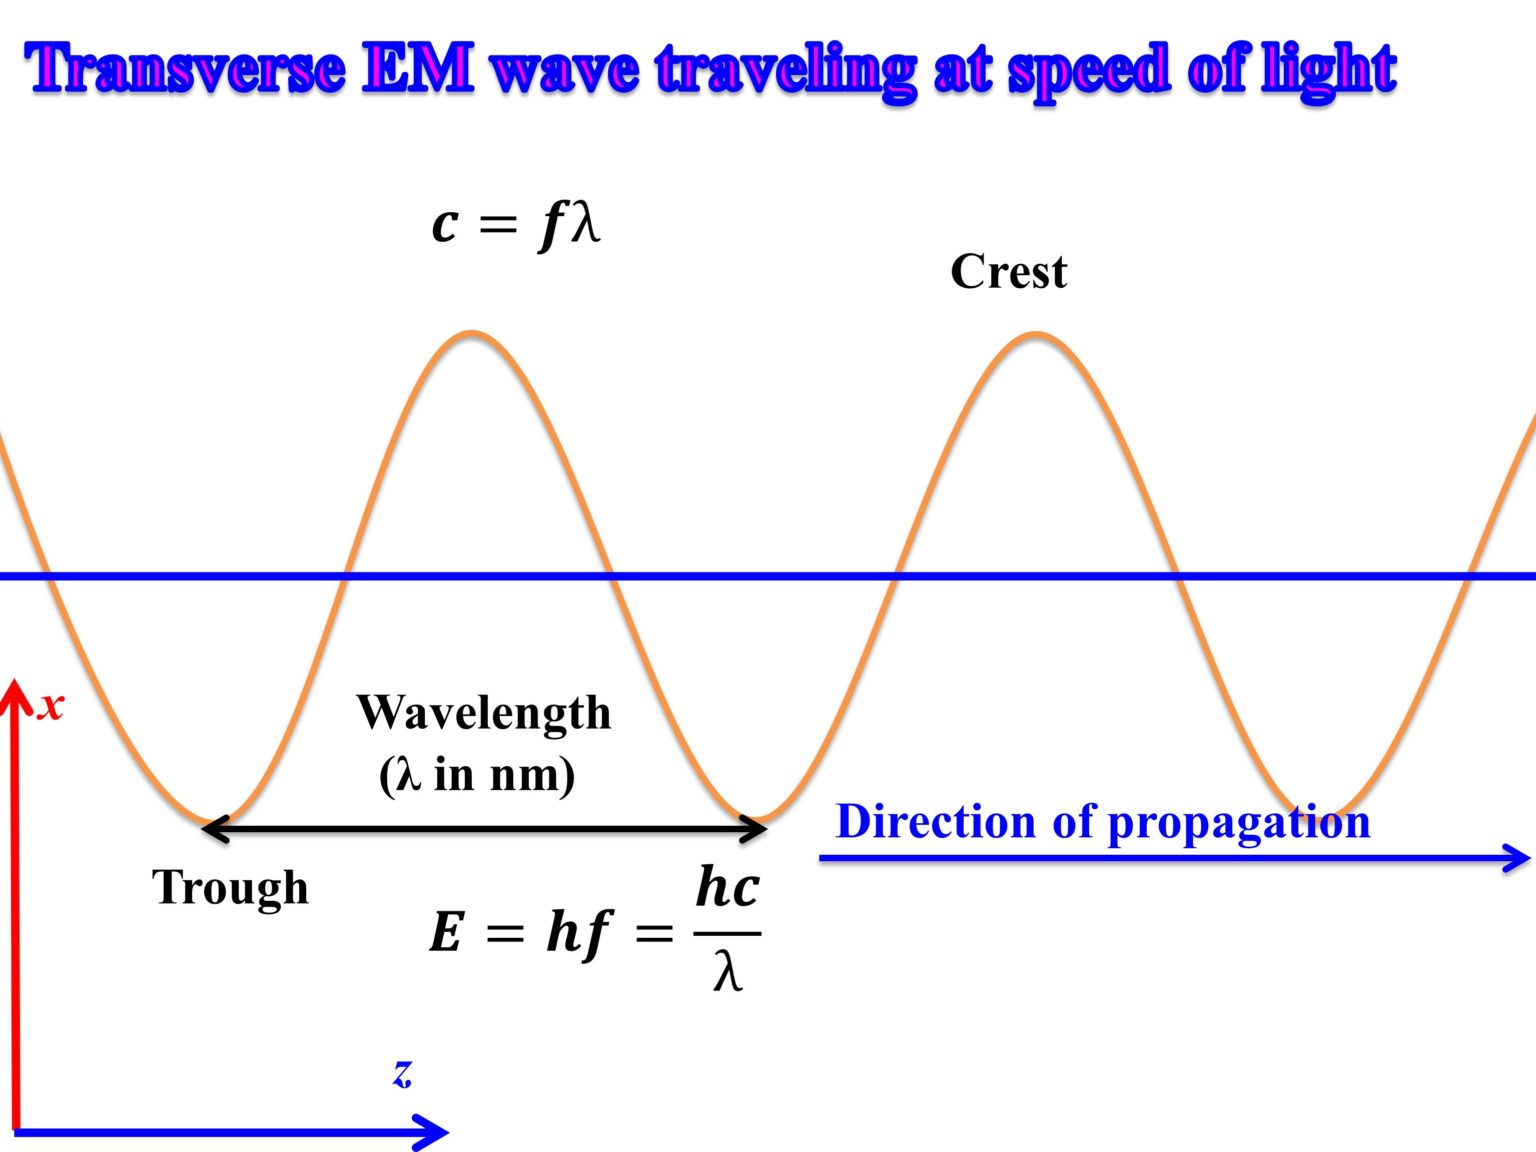 do all waves travel at the speed of light